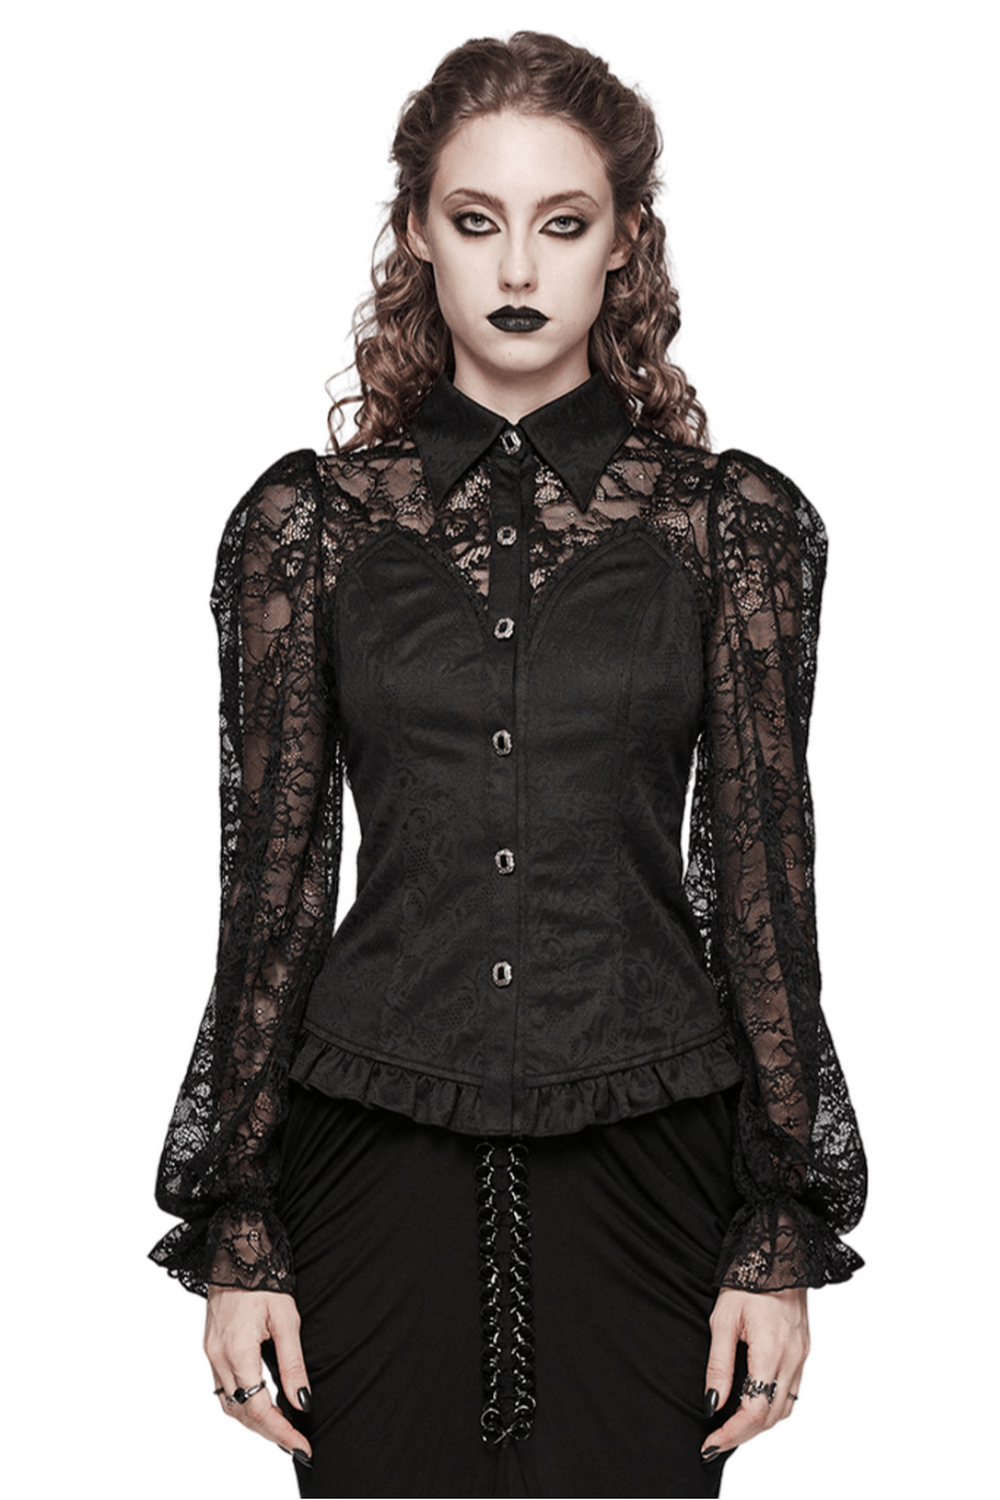 Women's Lace Sleeve Gothic Blouse with Dark Weave